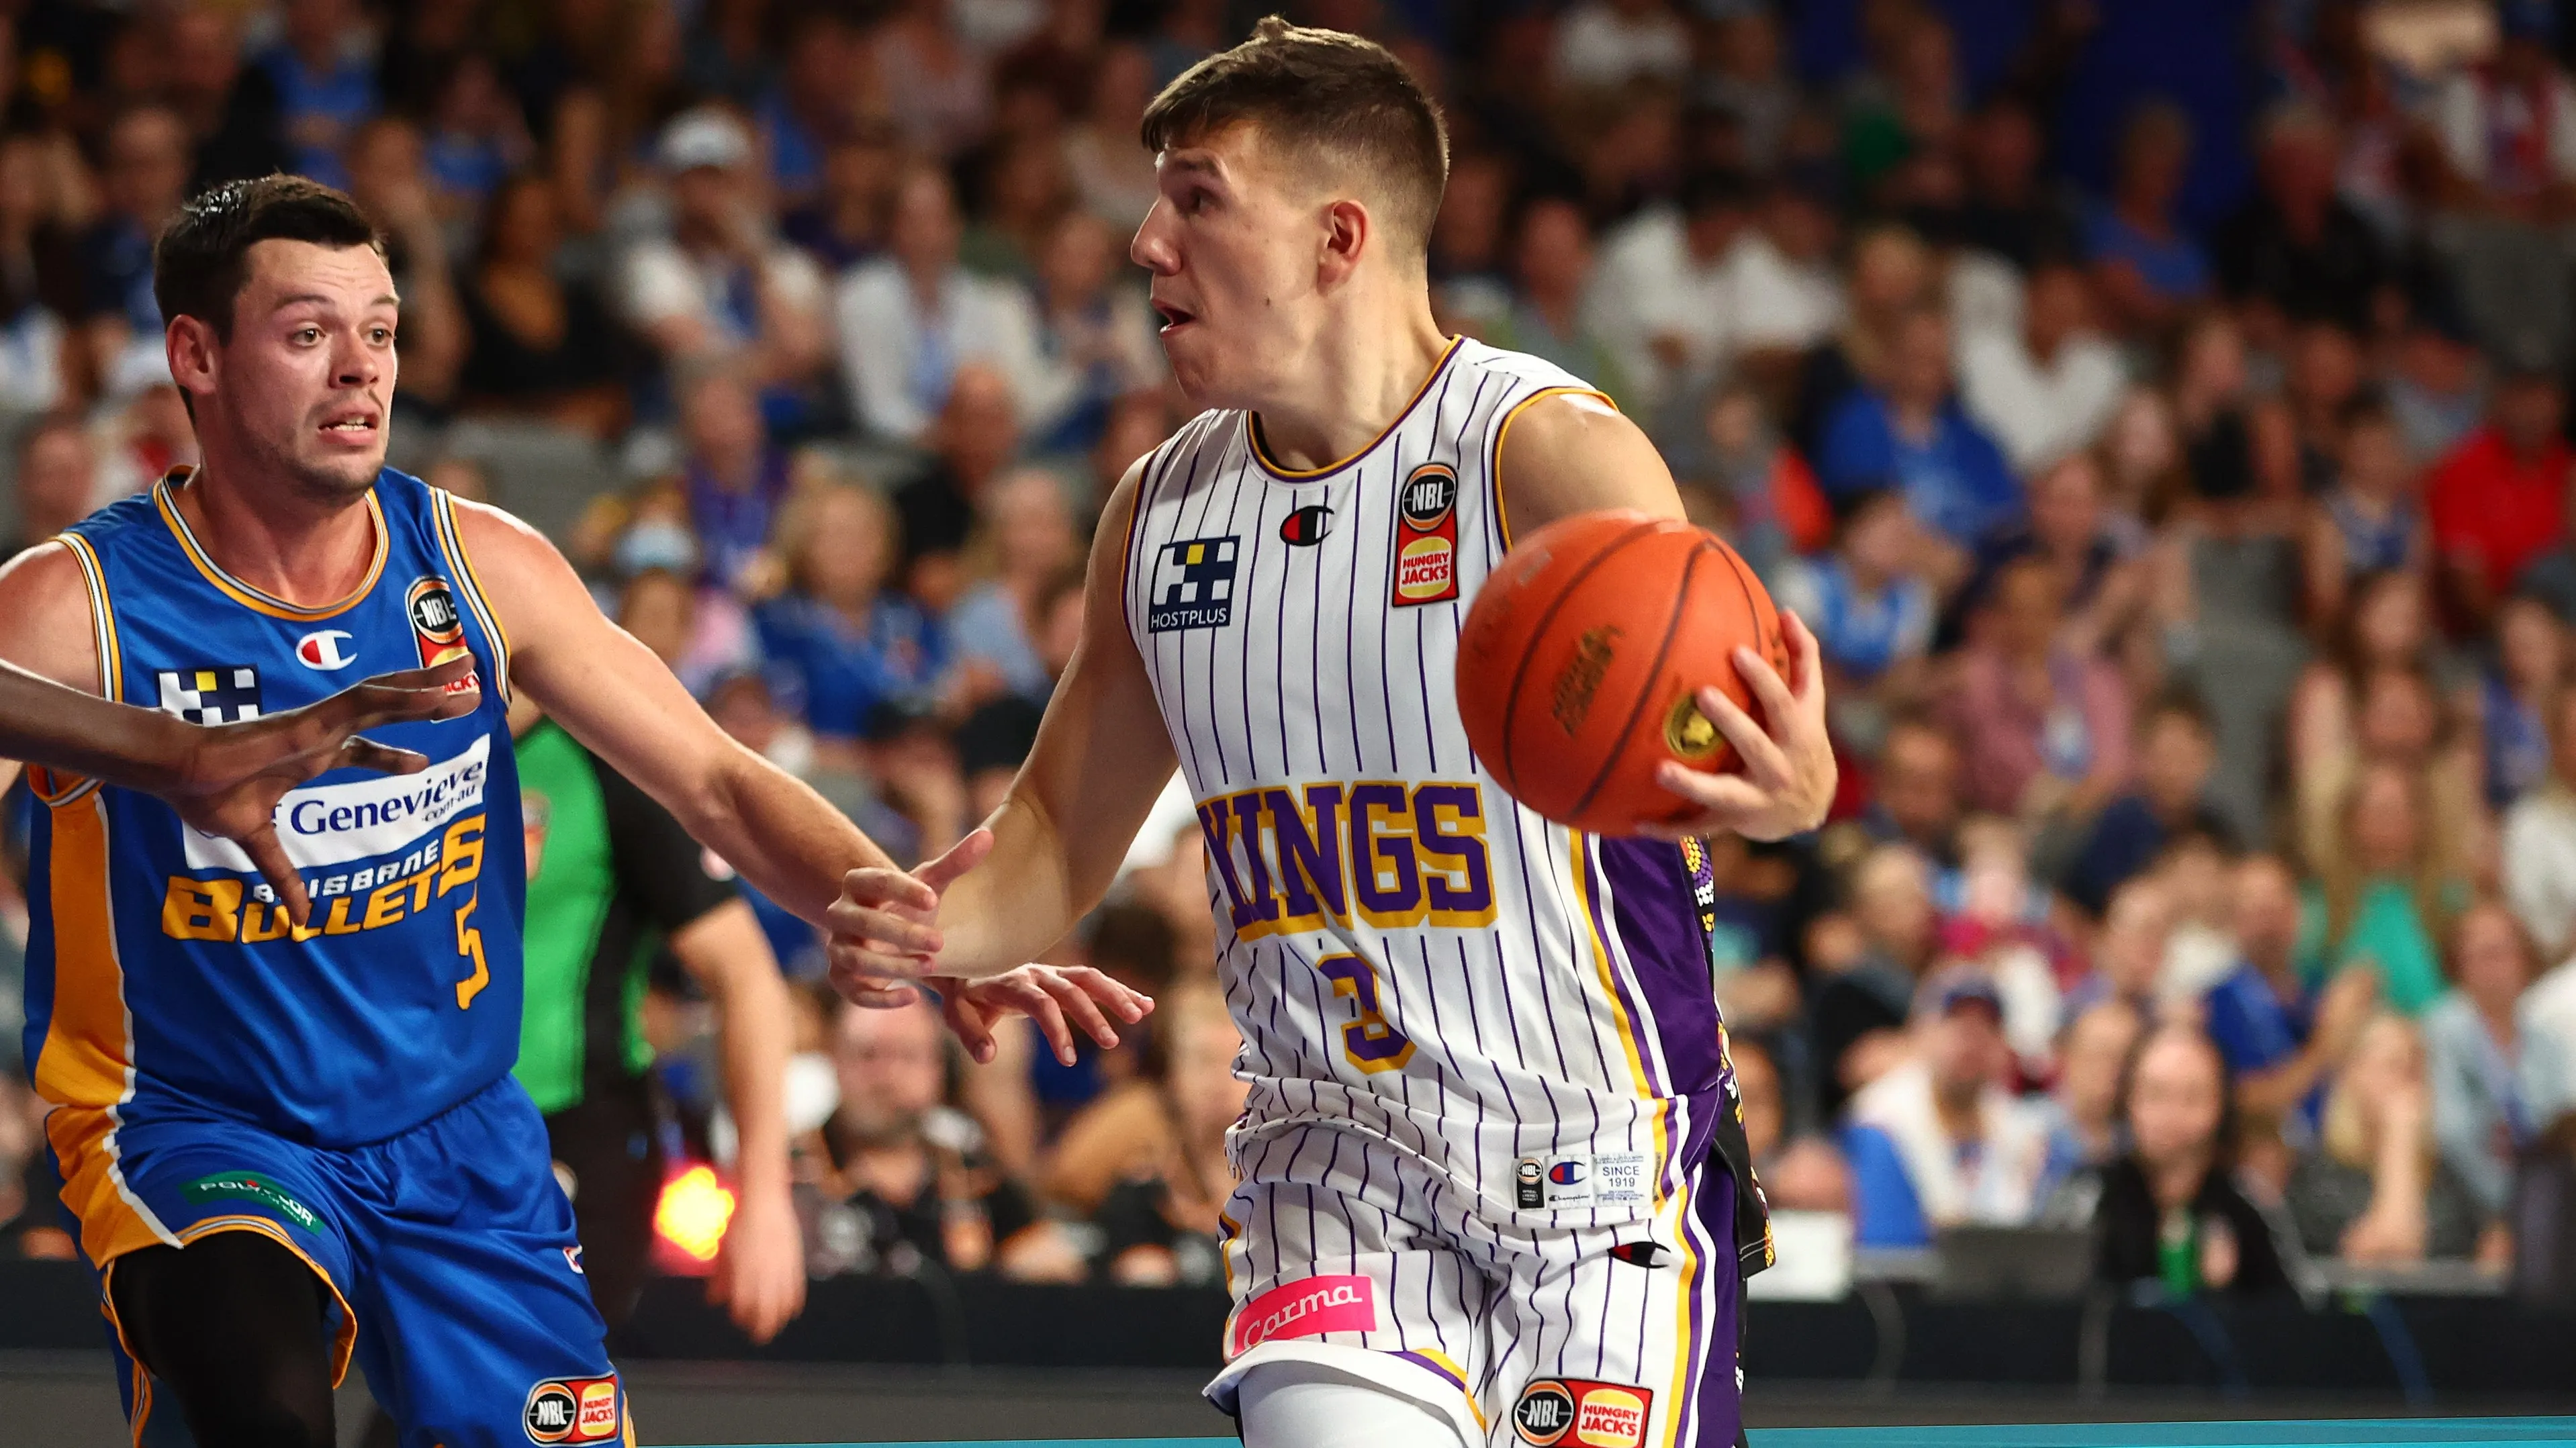 Two-time NBL champion DJ Vasiljevic will not be returning to the  @sydneykings for #NBL24. Read more via link in bio.